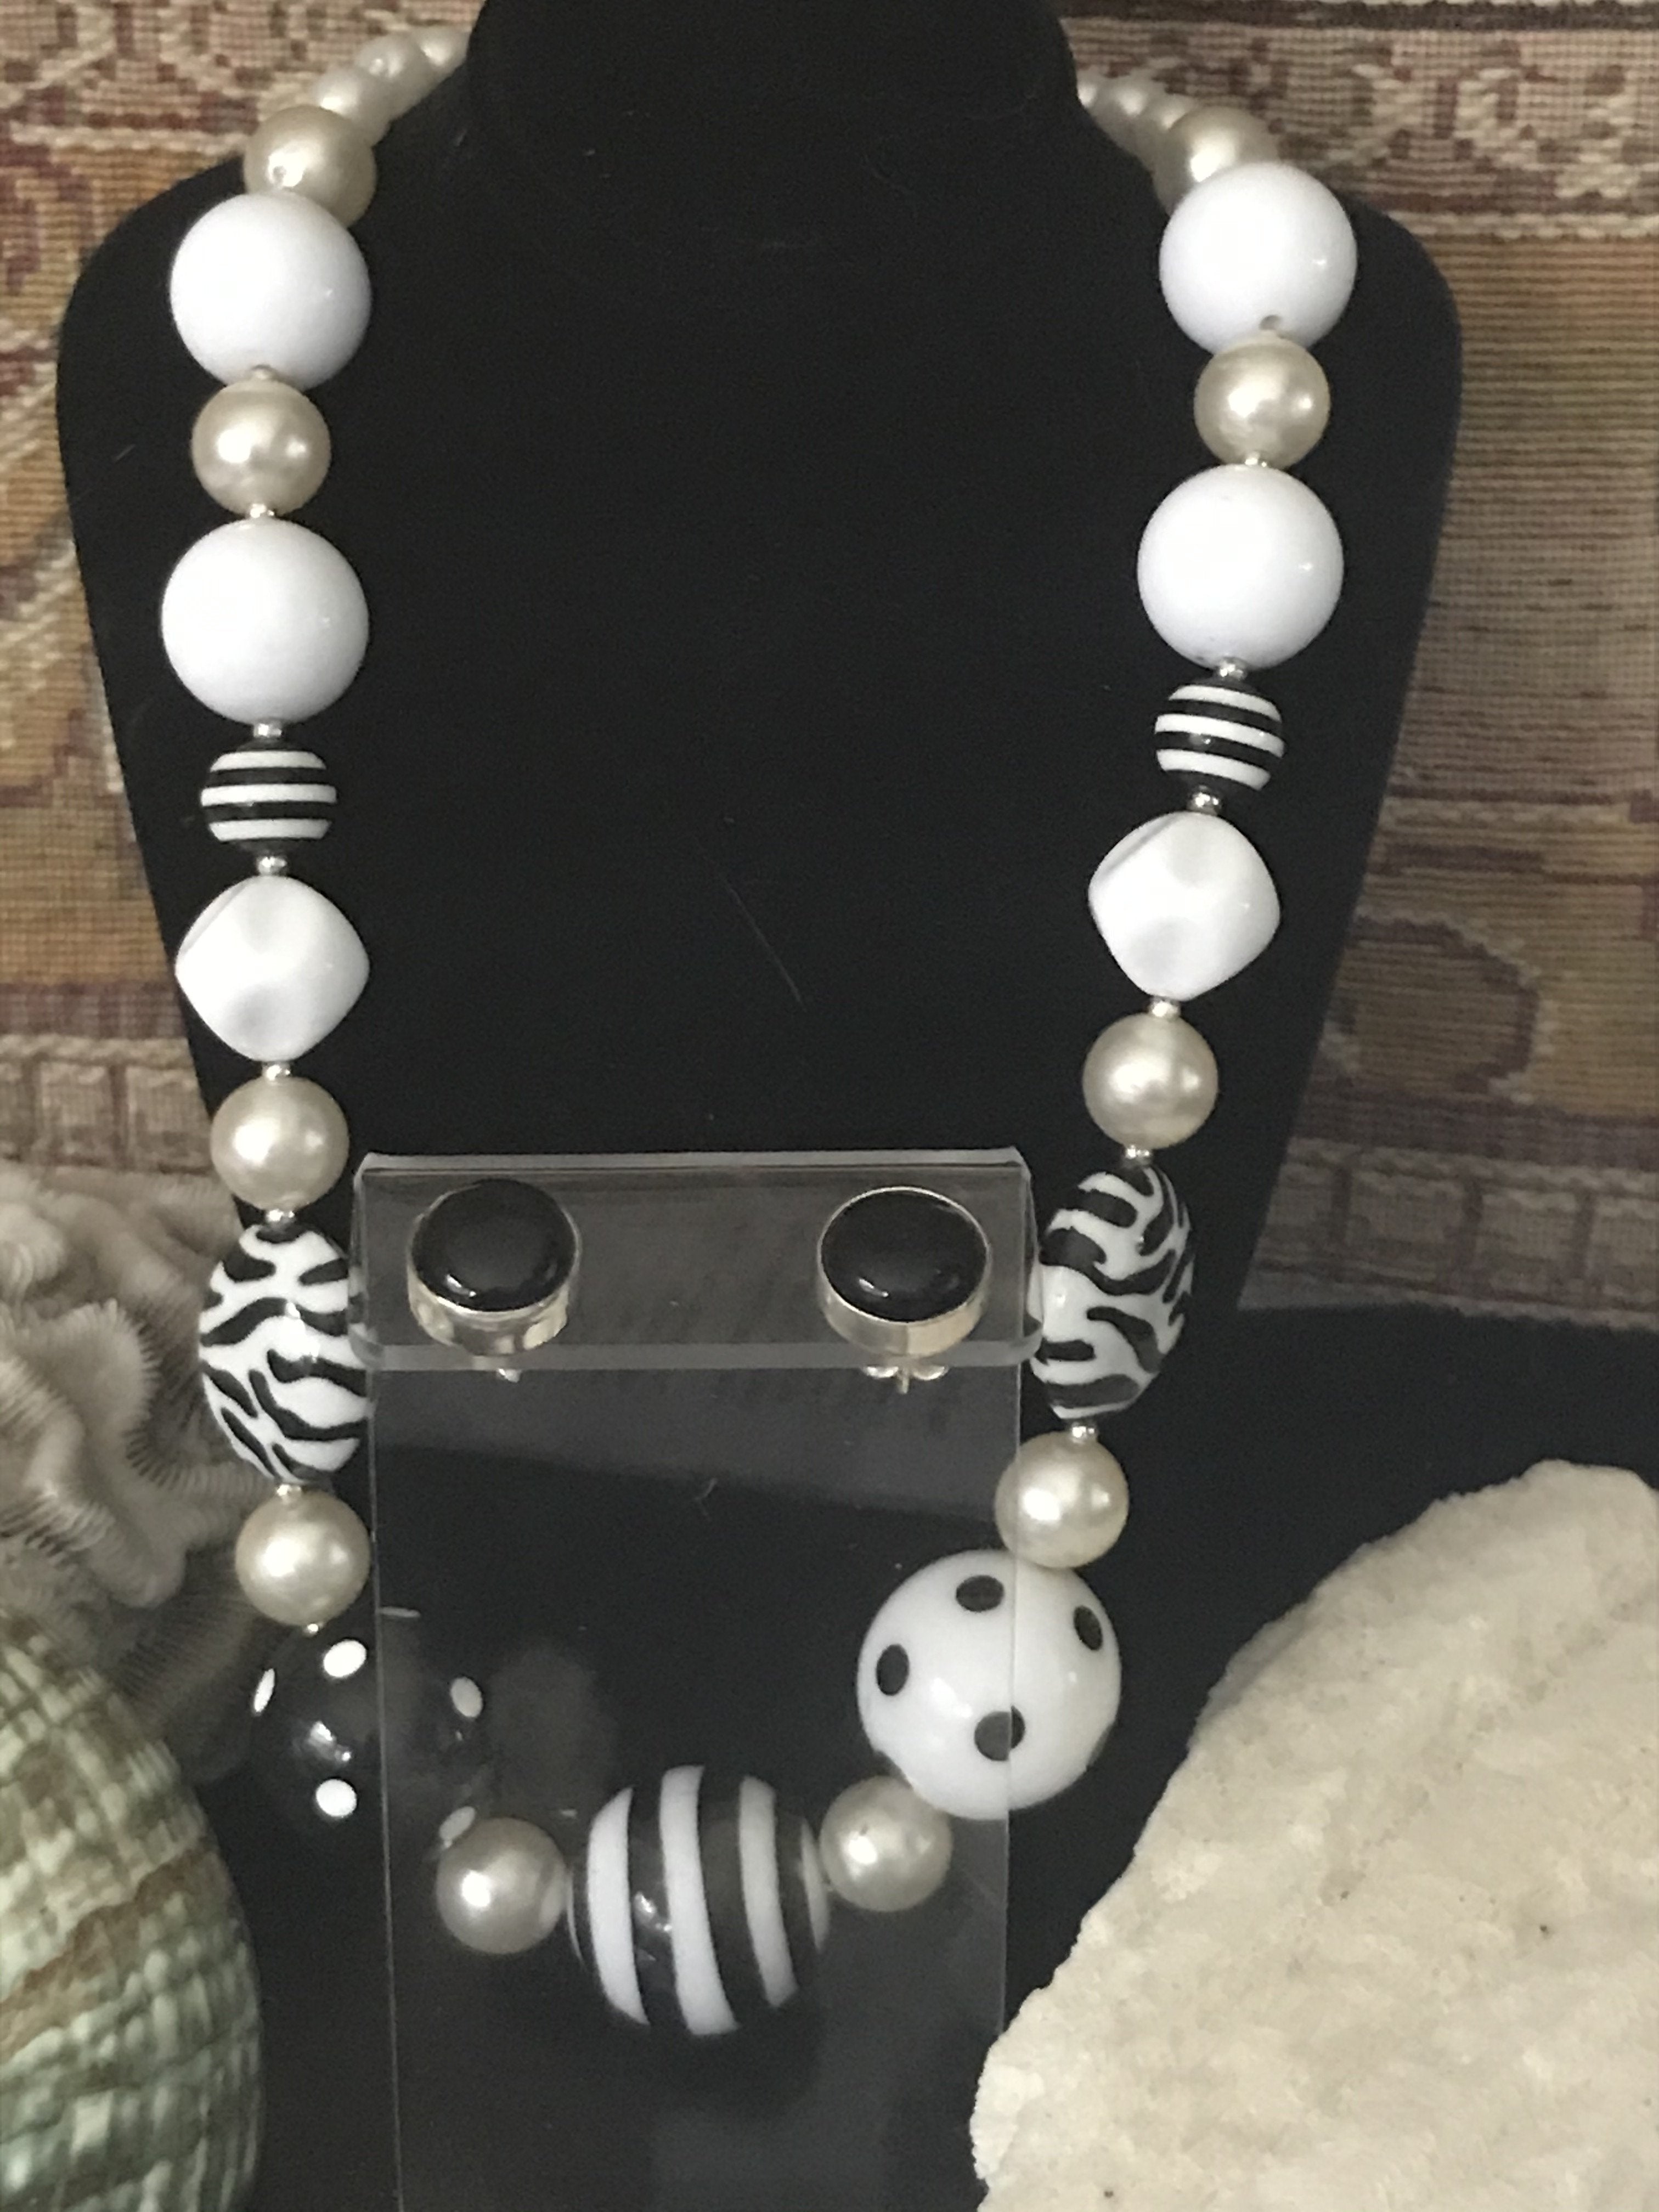 Black Onyx Silver Stud Earrings & Fashion Necklace Jewelry Set - Shop Thrifty Treasures